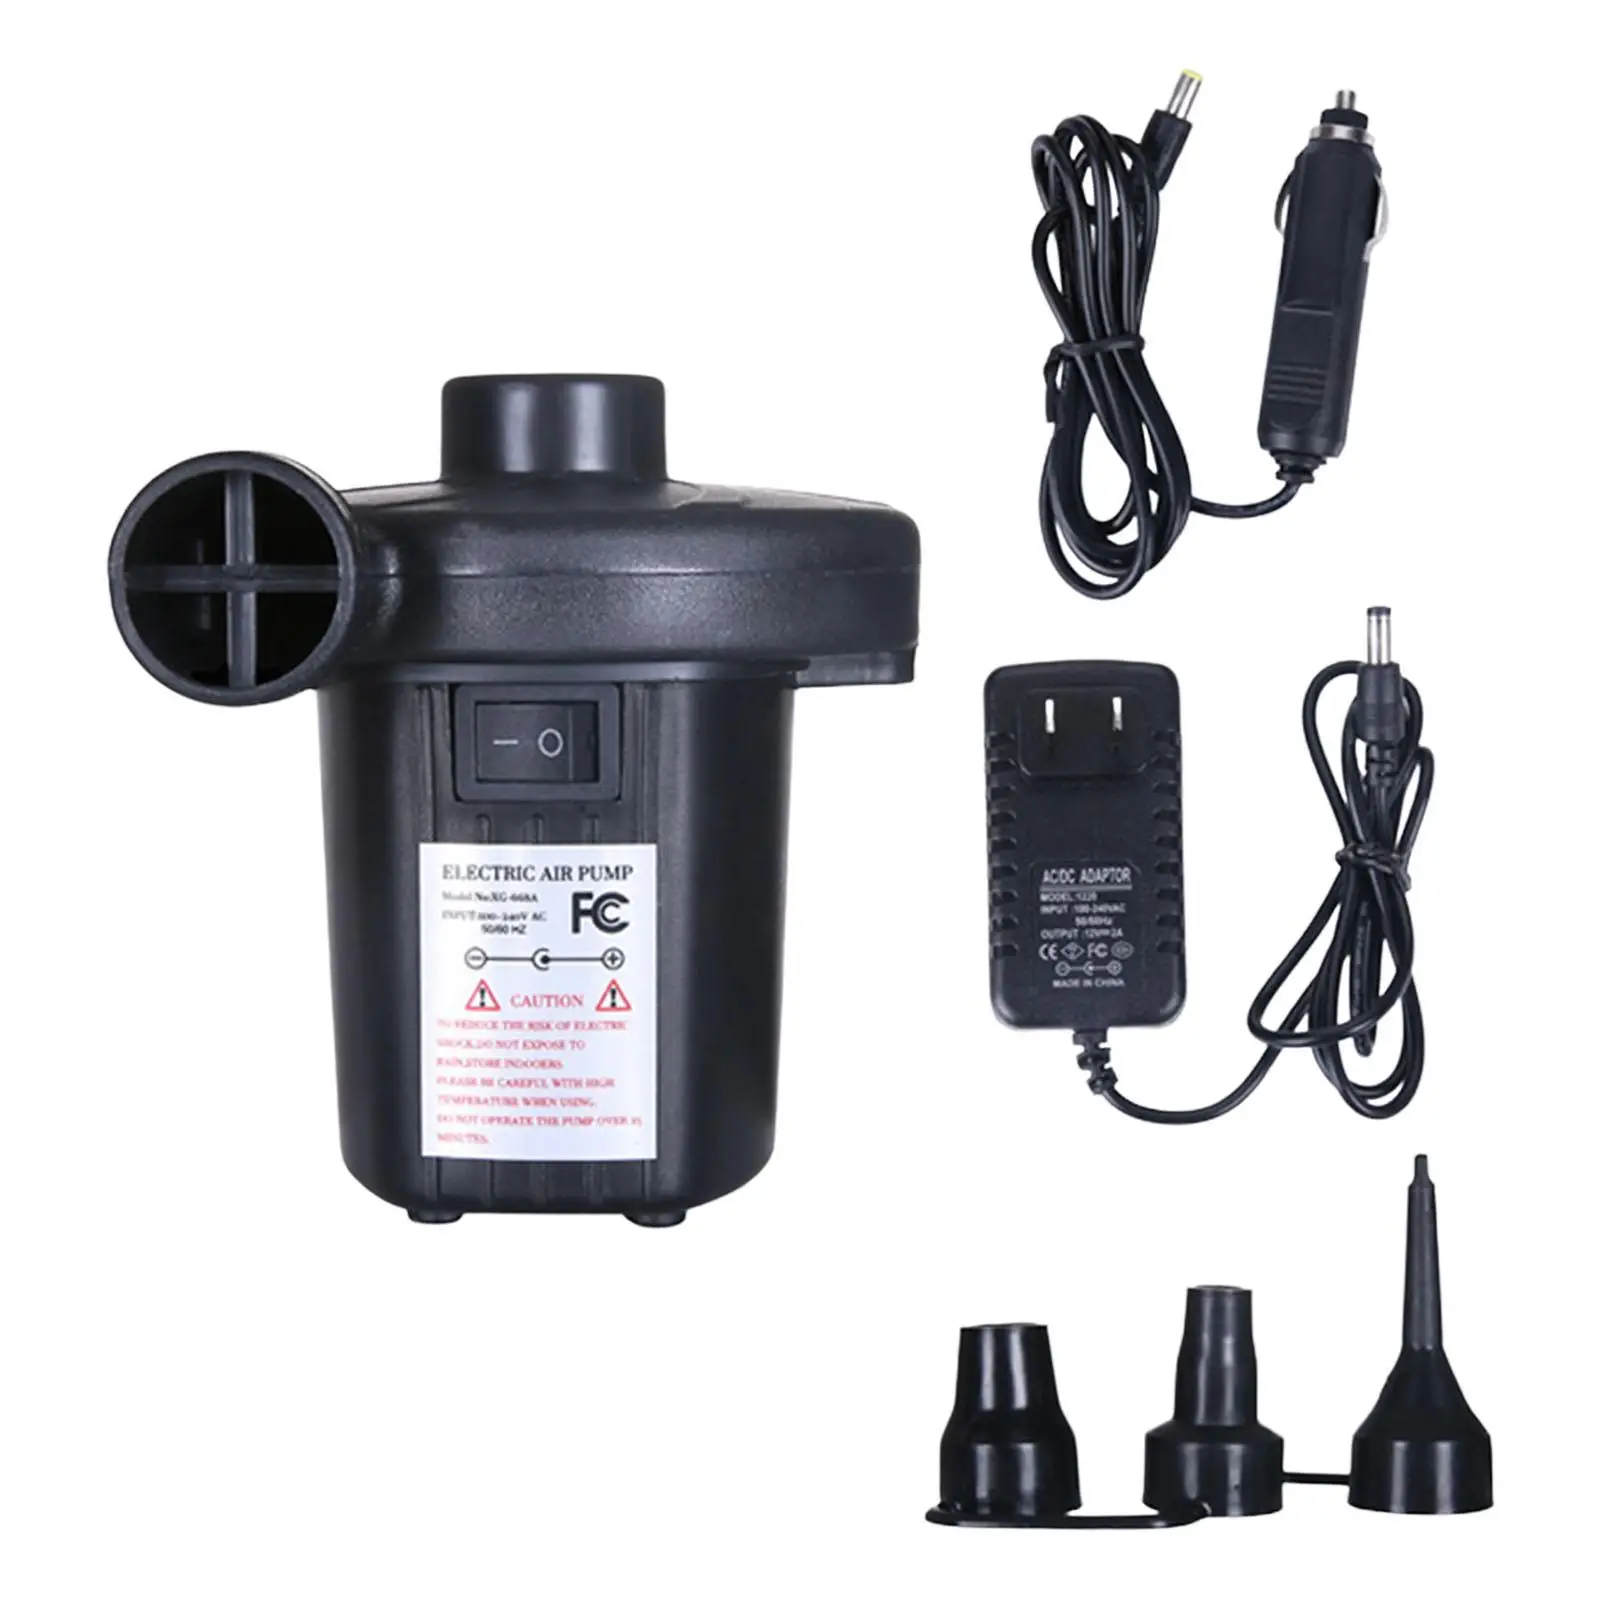 Electric Air Pump Portable with 3 Heads Nozzle 110V AC/12V DC Fast Inflator Deflate for Inflatables Air Beds Outdoor Camping